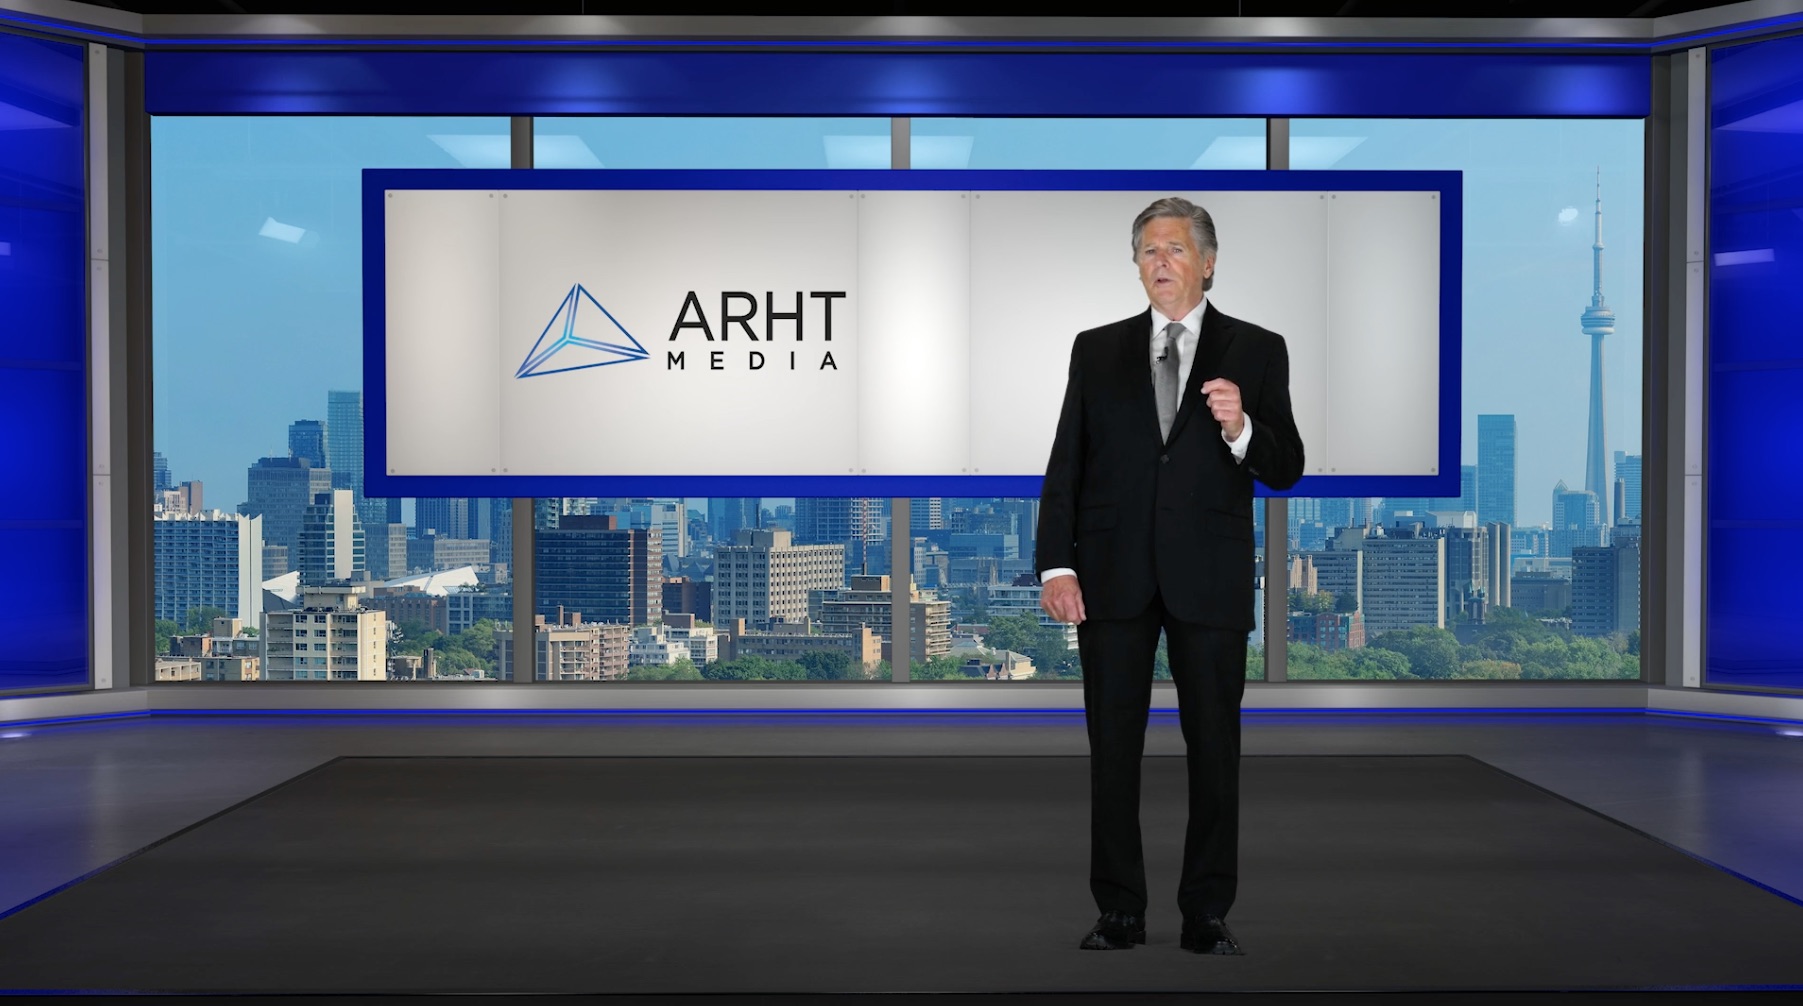 Gord Martineau appears on ARHT’s Virtual Global Stage